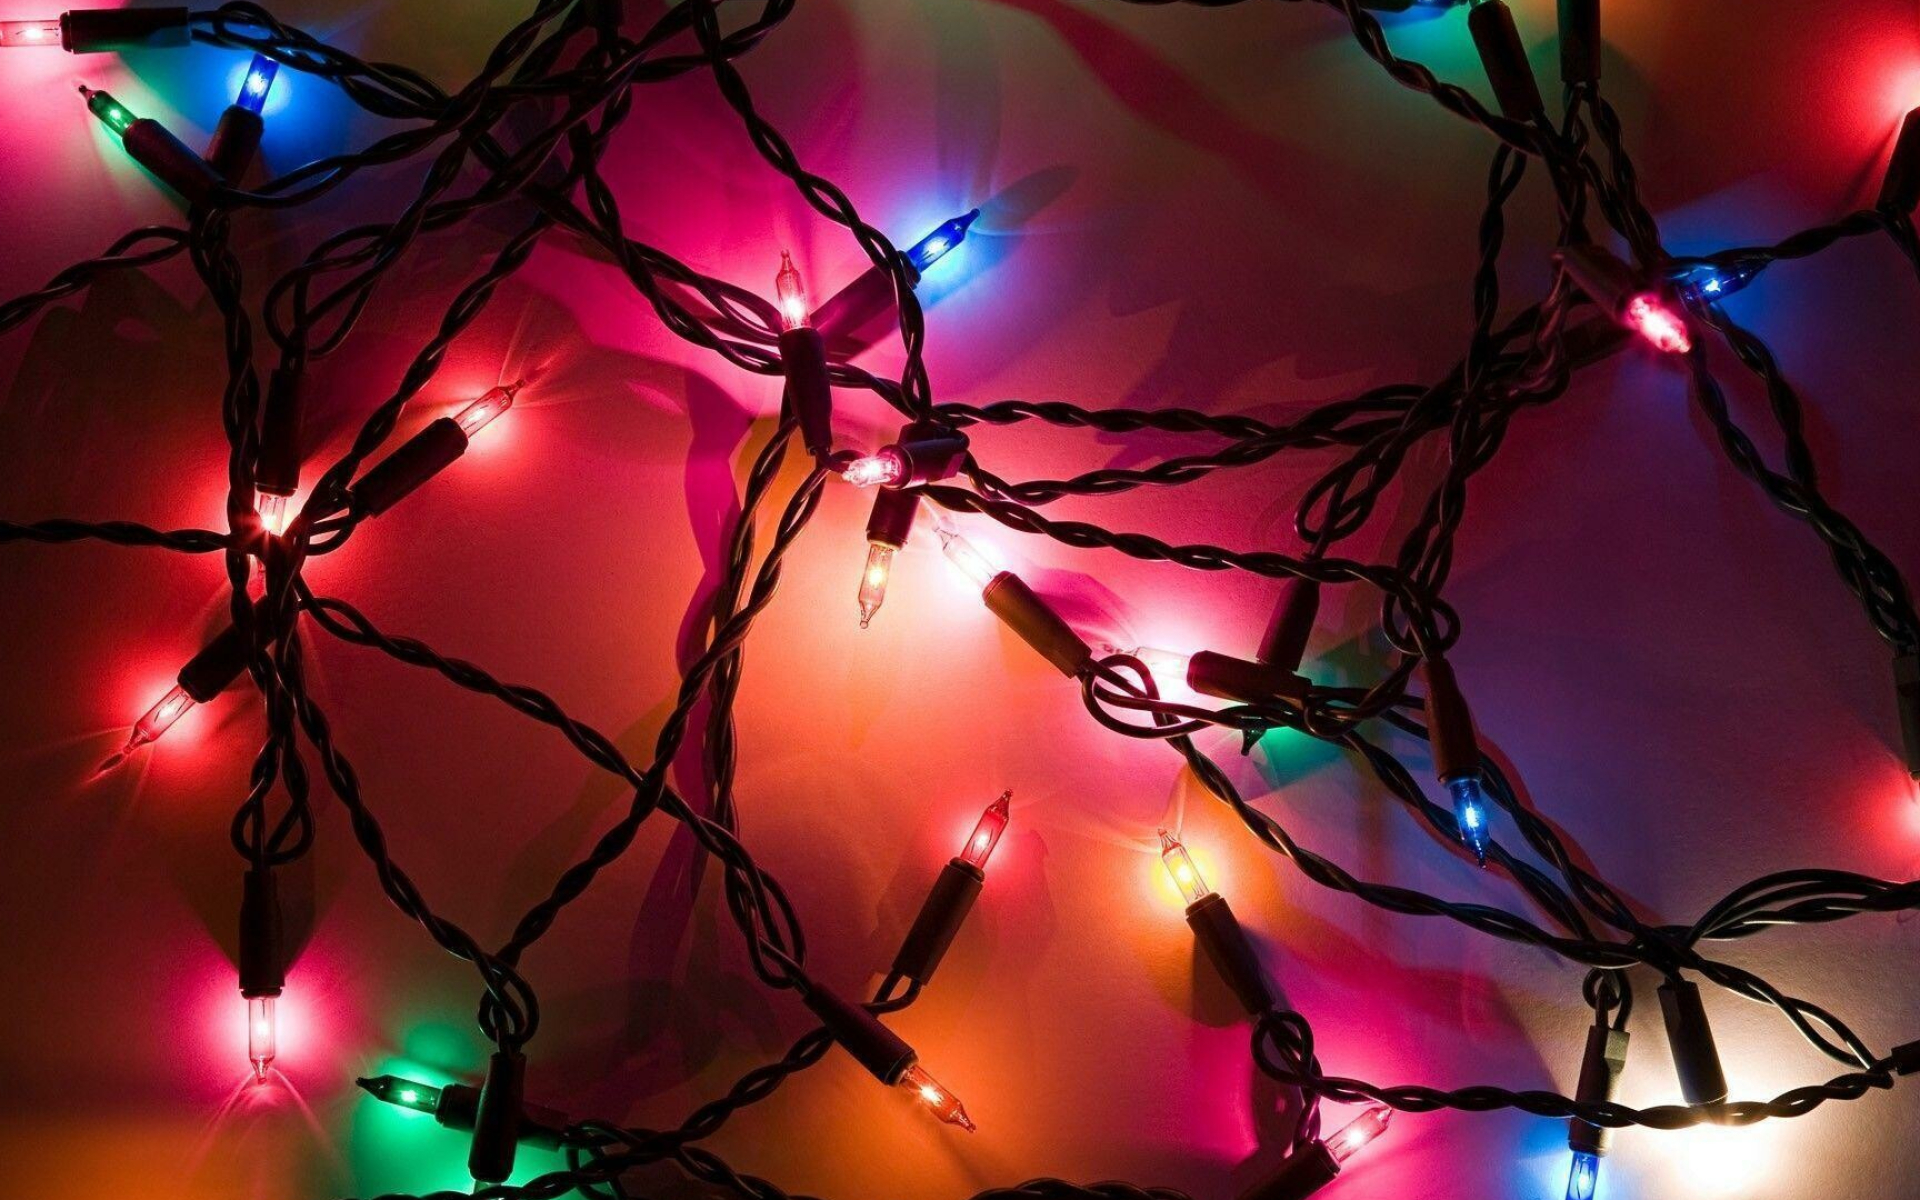 Fairy Lights: Christmas, Small colored electric bulbs strung together and used for decoration. 1920x1200 HD Background.